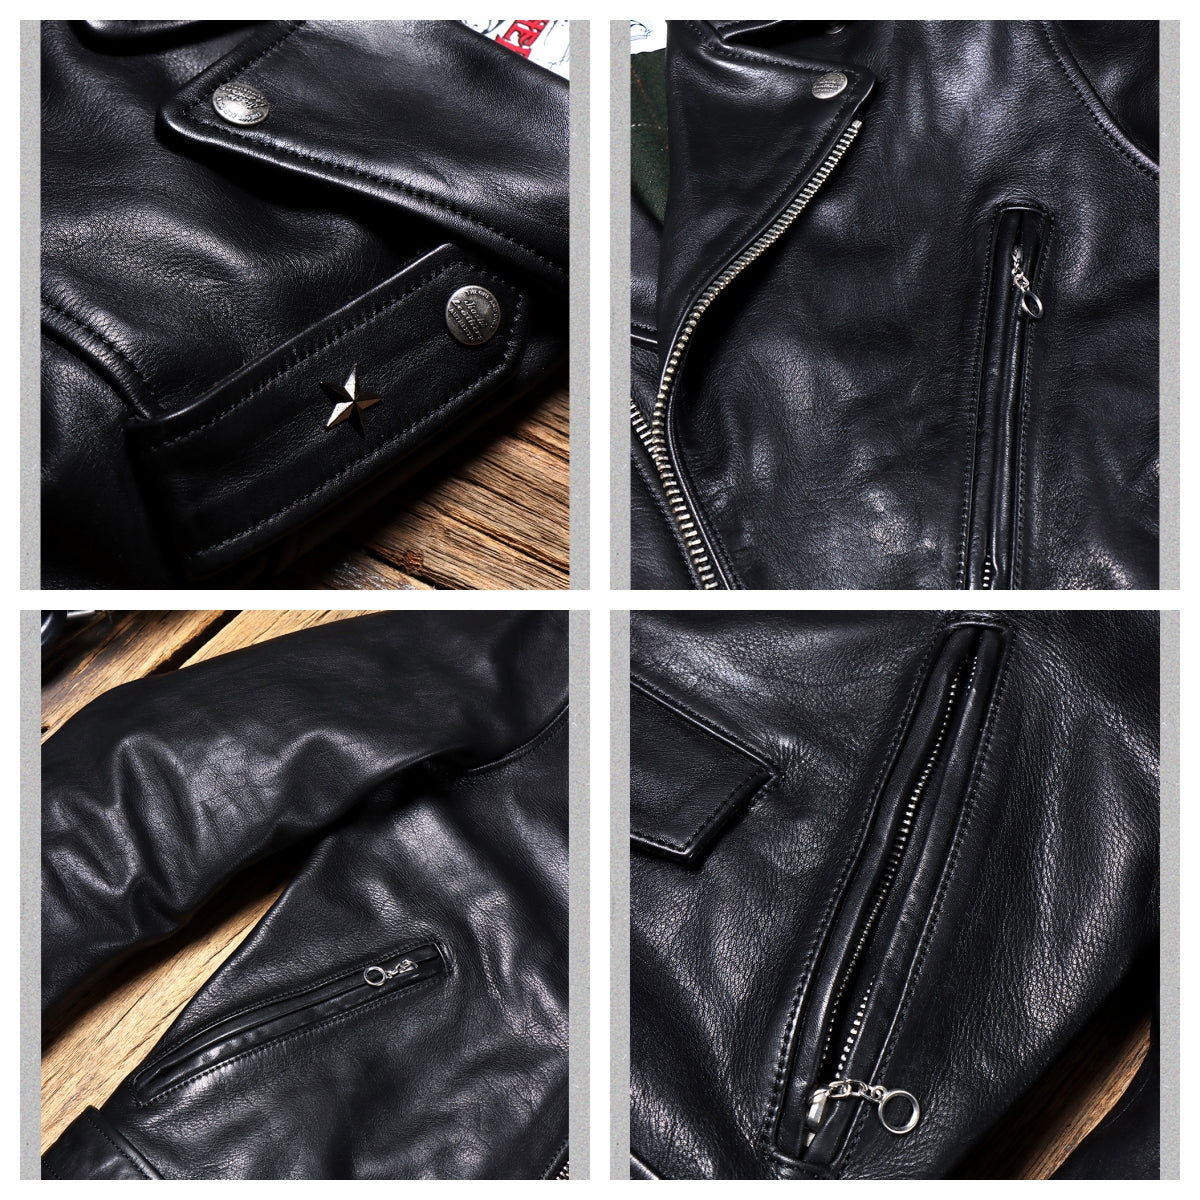 Men's 1950s Motorcycle Leather Jacket 613